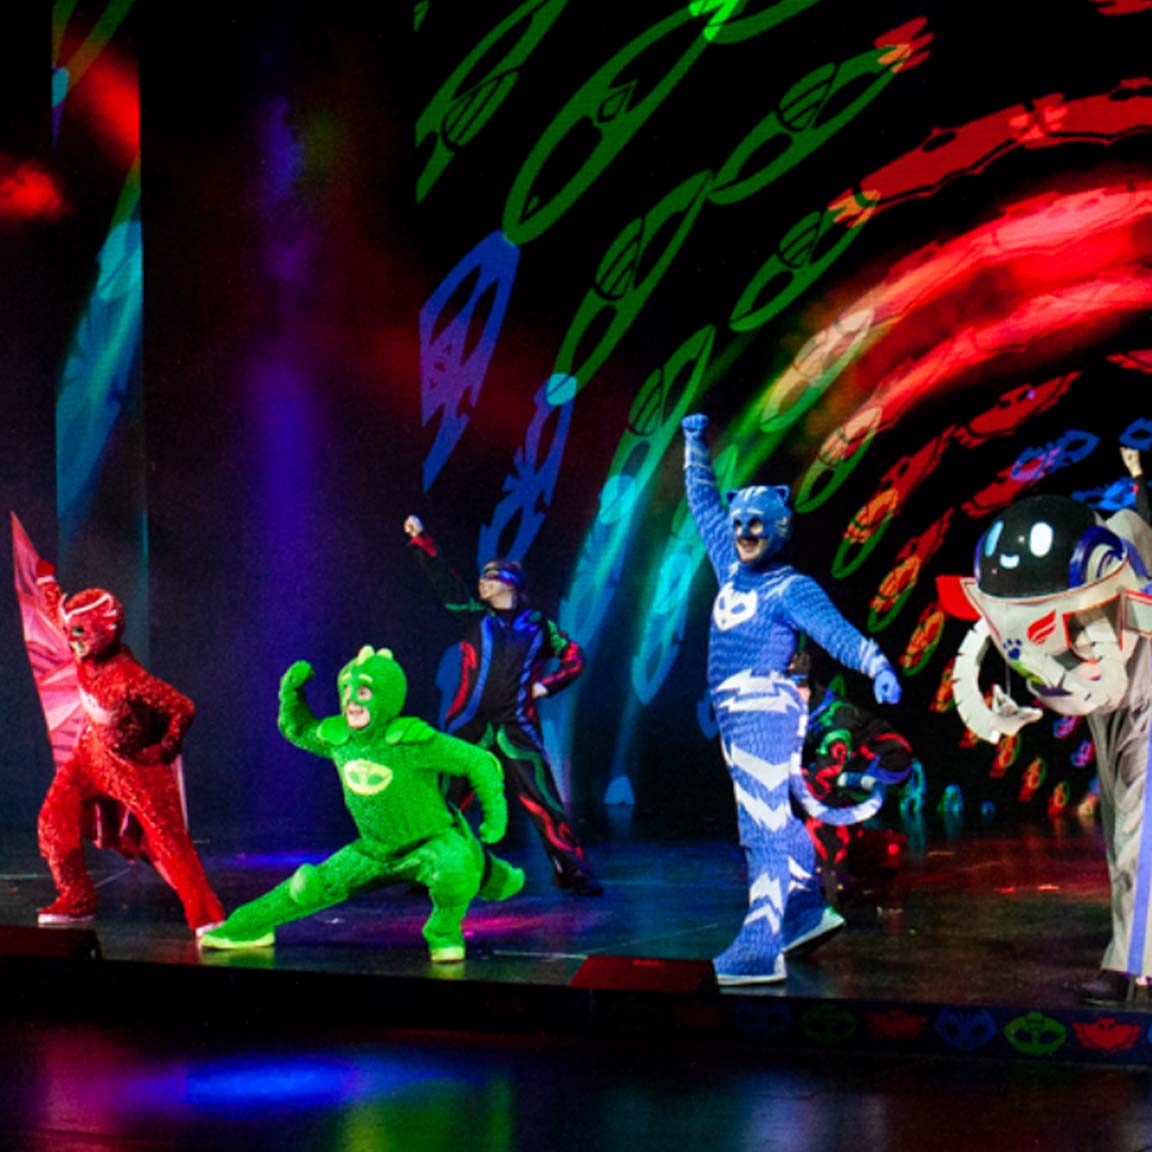 The PJ Masks Performing On Stage